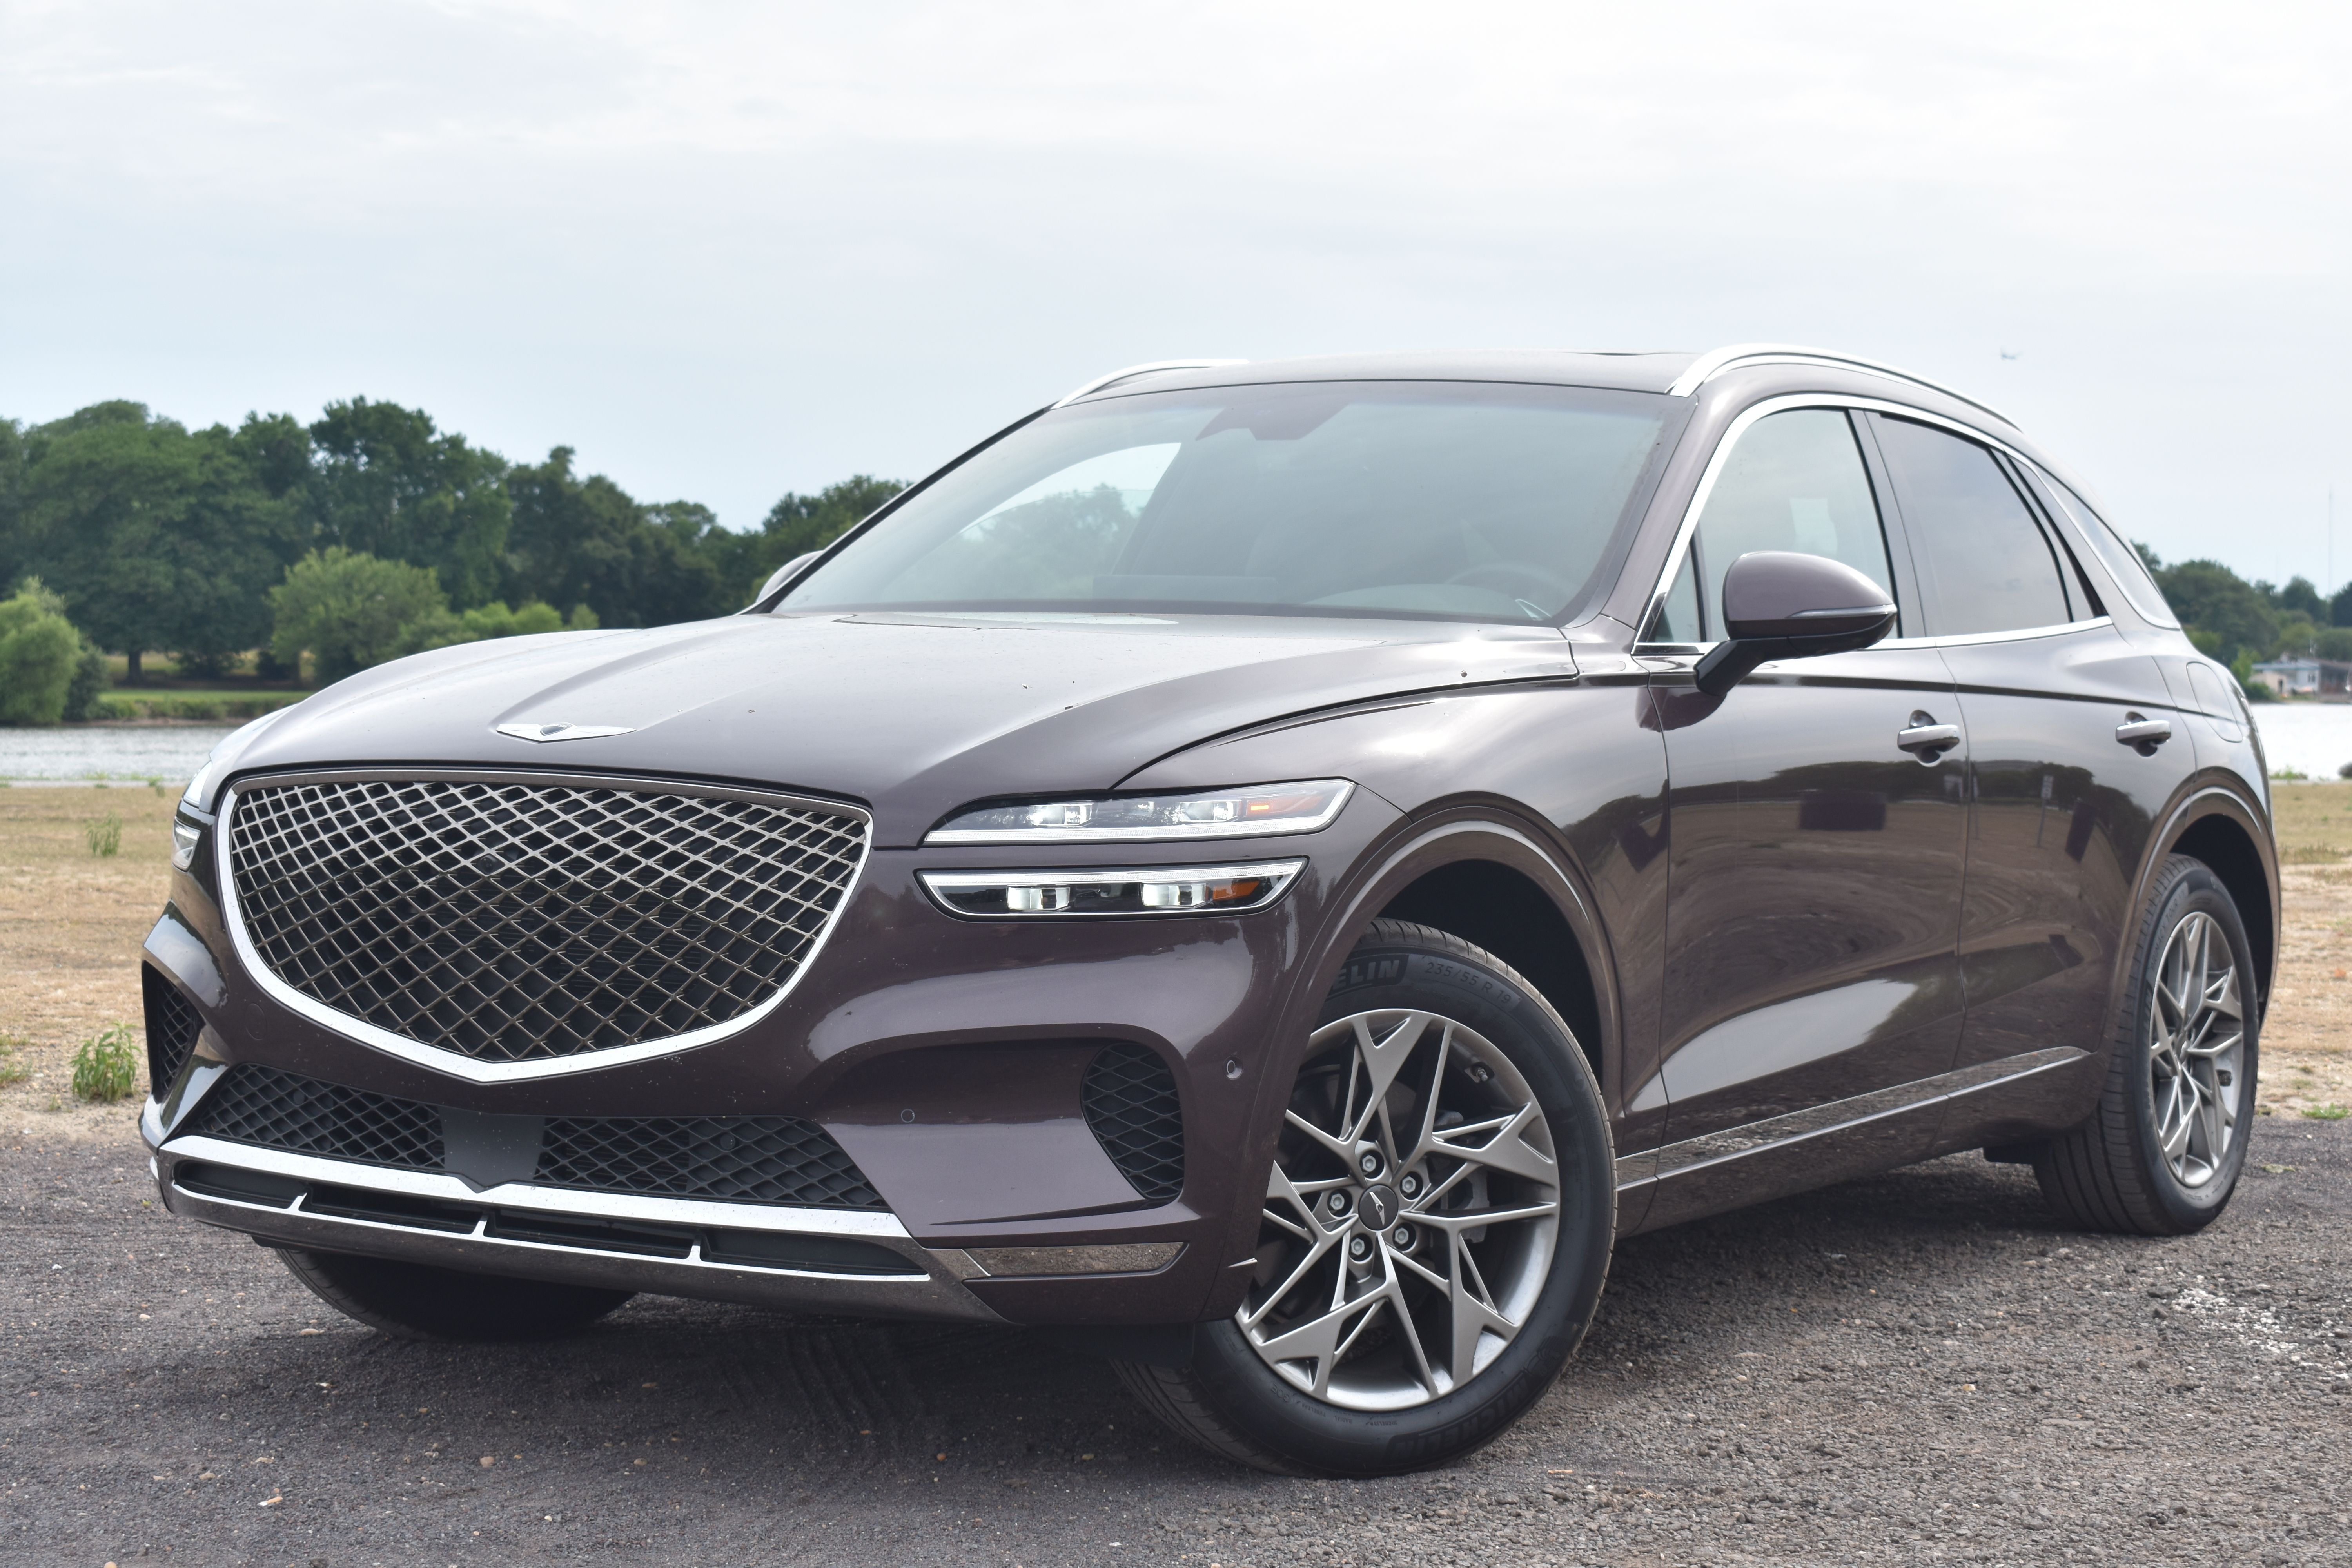 2022 Genesis Gv70 25t Awd Review A Luxury Suv For The Masses